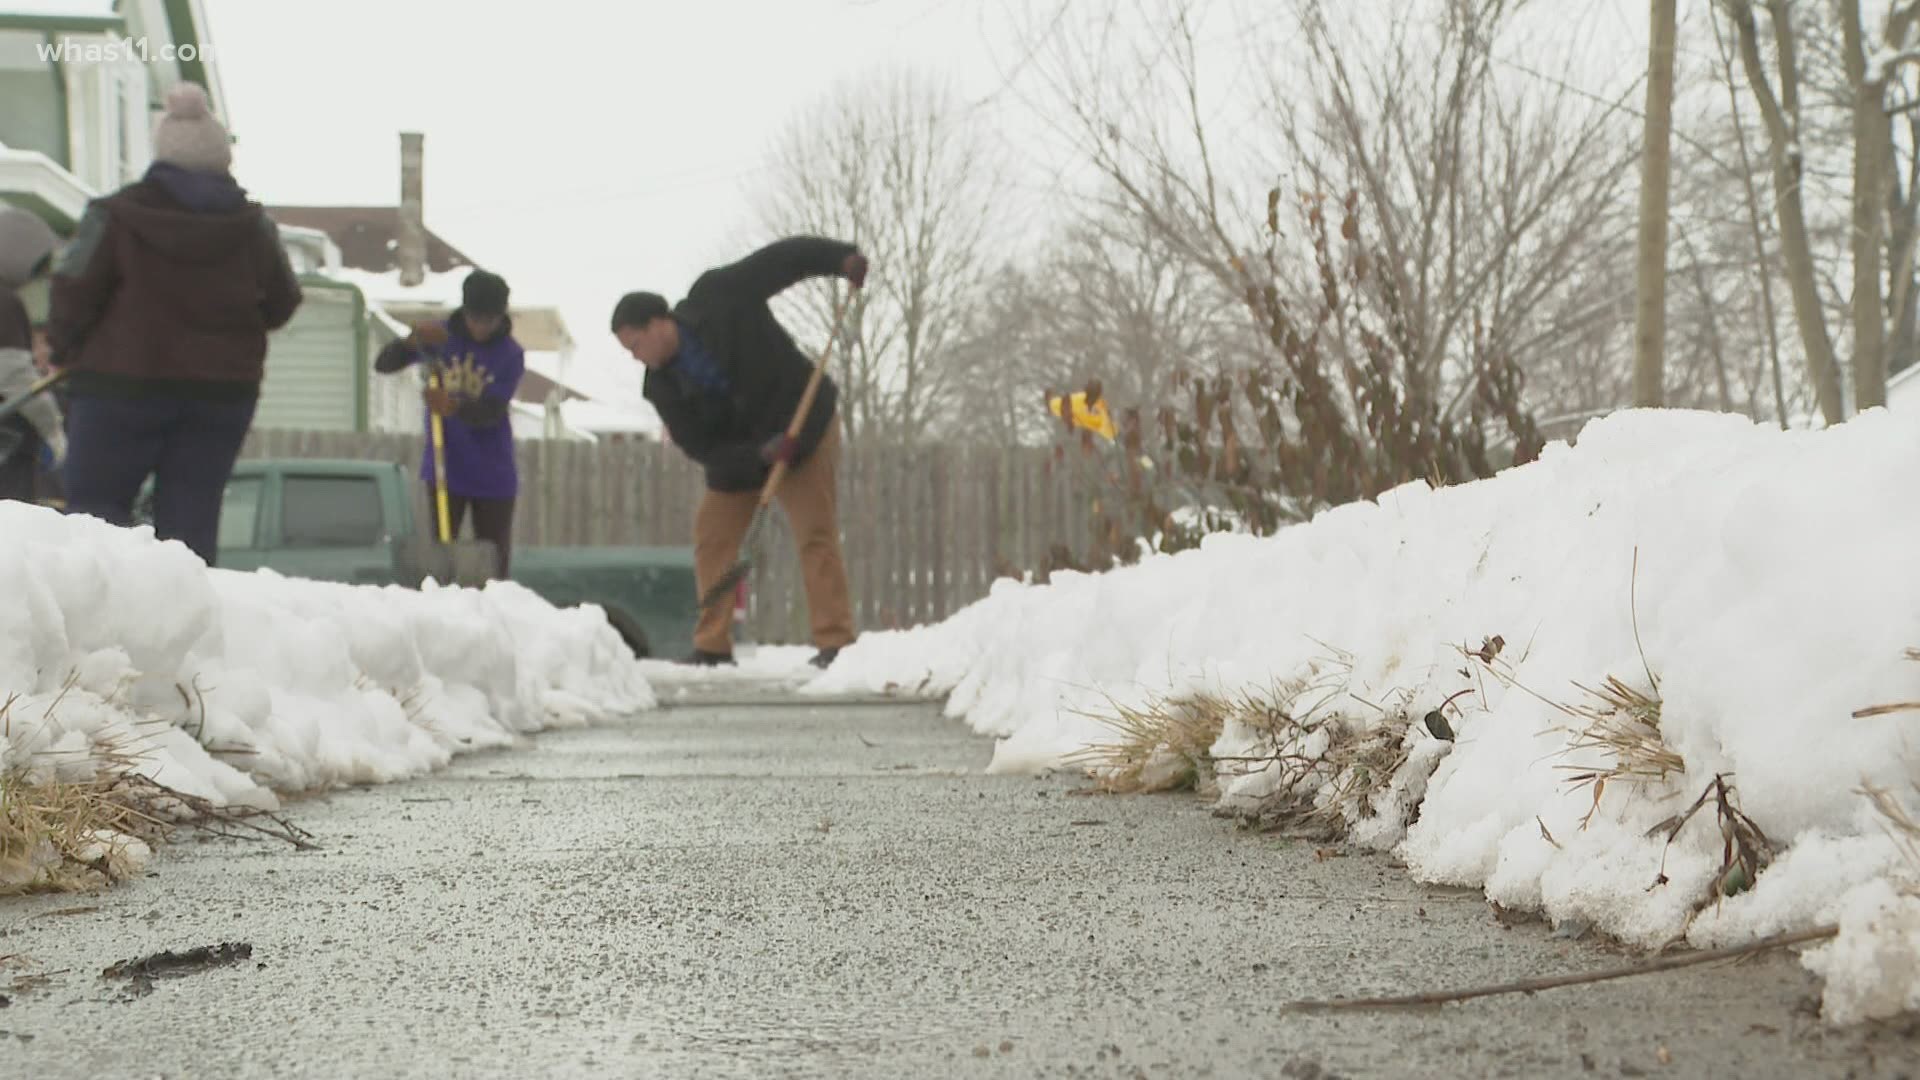 Instead of staying in the warmth of their homes, these teens are out in the cold for hours with shovels in hand.